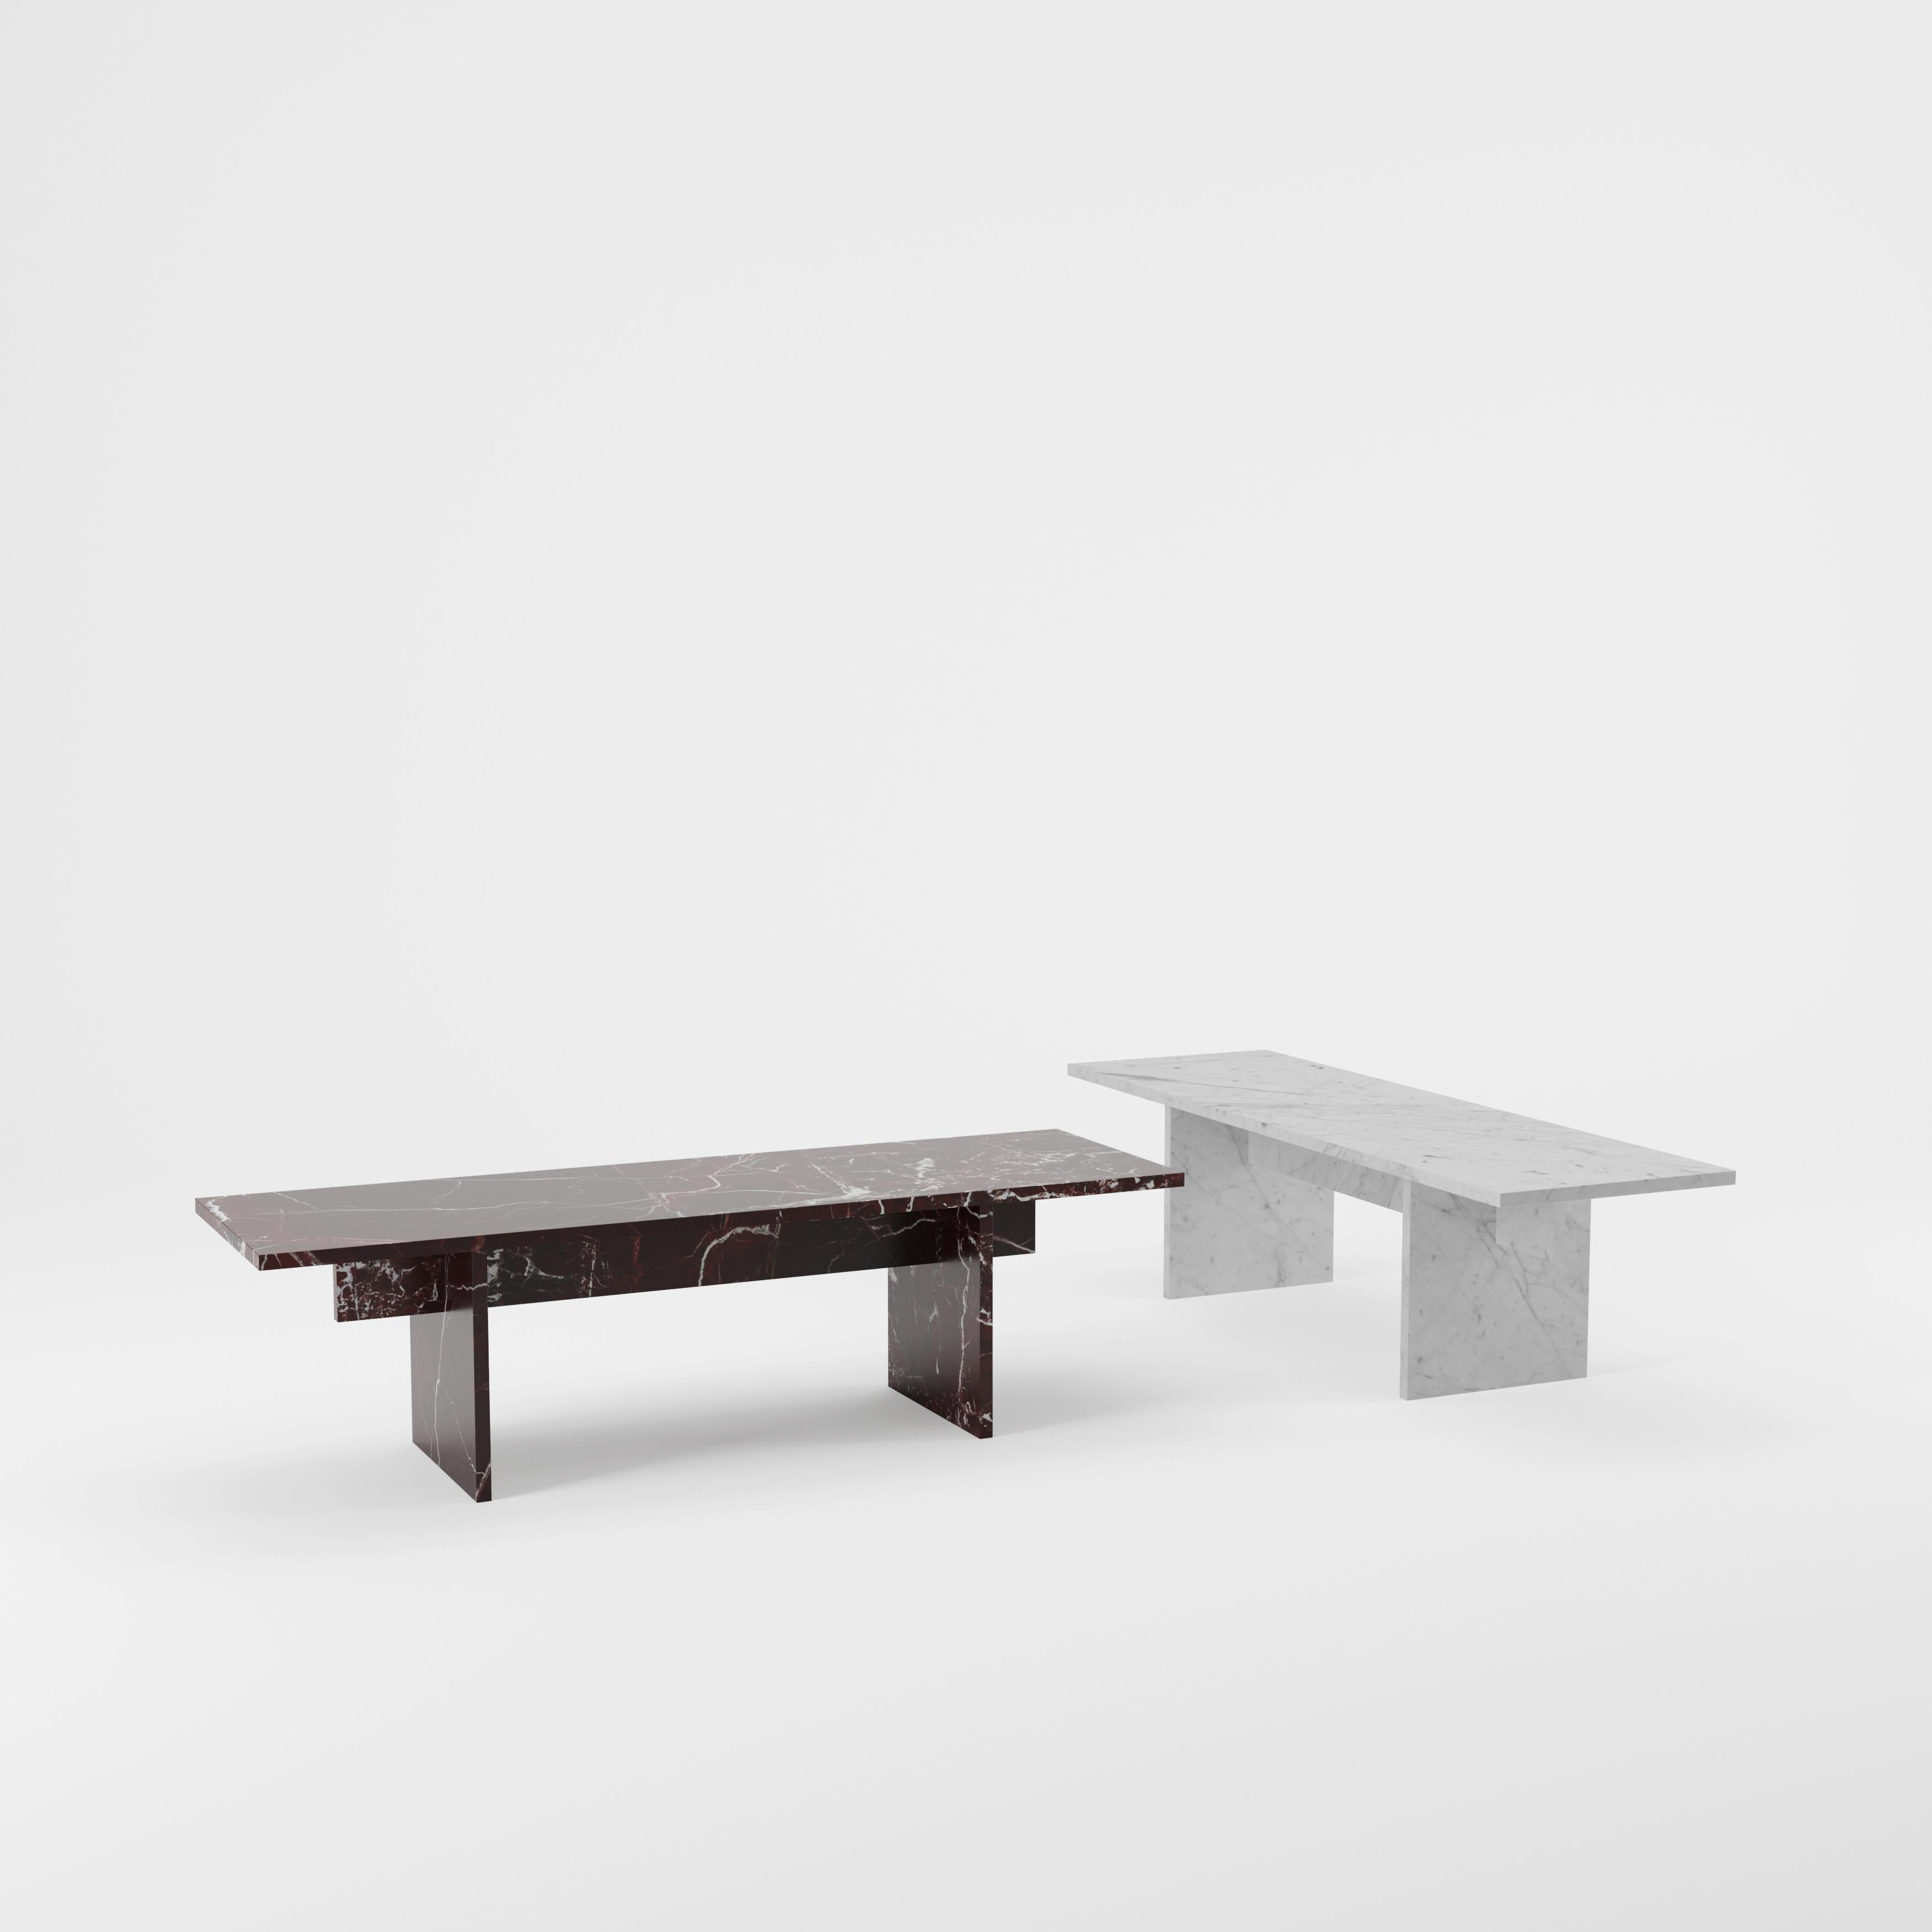 The Vondel coffee table embodies a resolute solidity of form that captivates with its understated yet commanding presence. Its simplistic yet robust shape imbues it with inherent versatility, seamlessly transitioning between its roles as both a